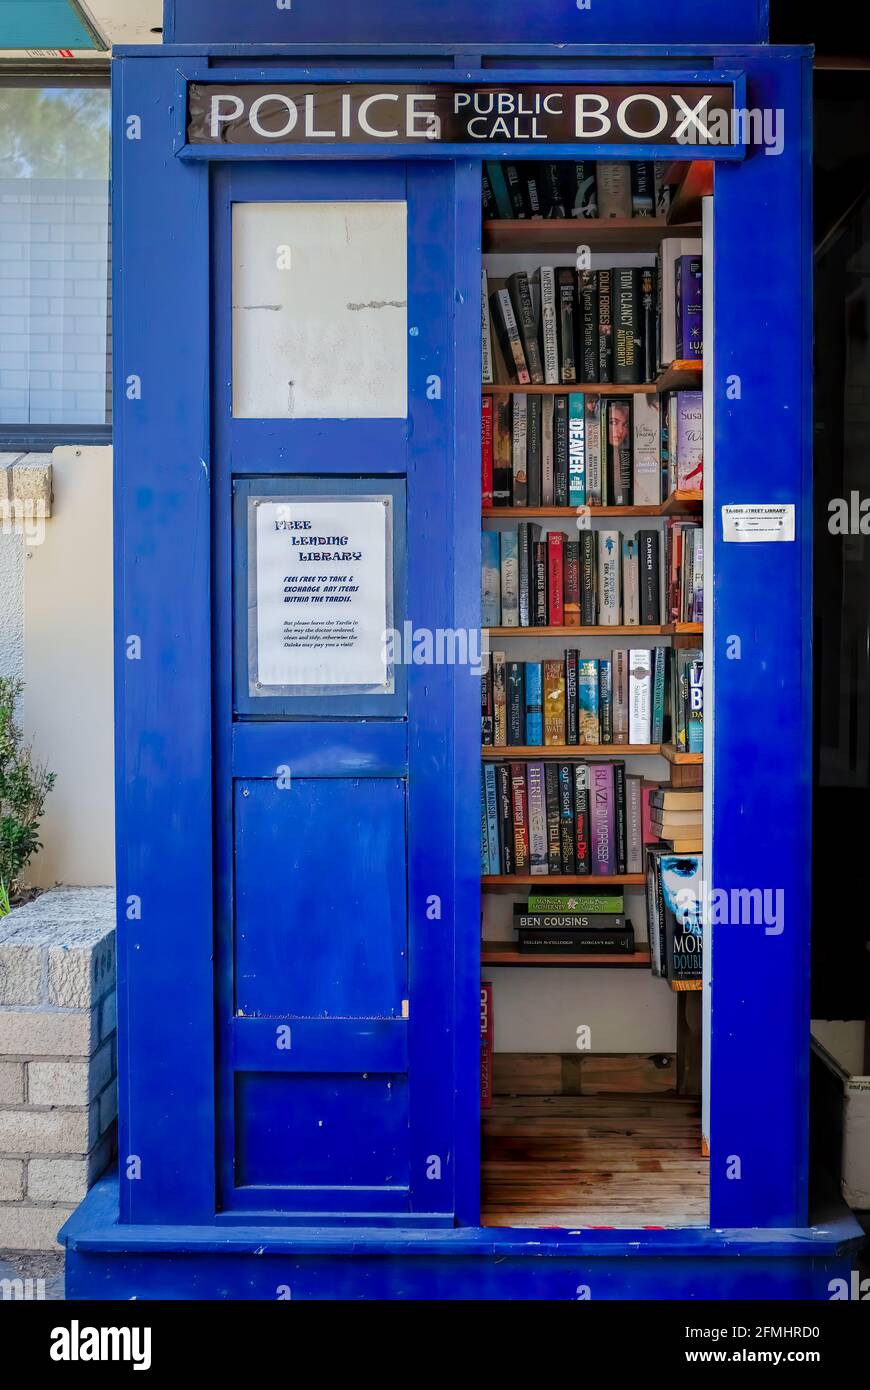 Tardis pop up community library for giving away and swapping free books, built and managed by locals these promote reading sharing recycling of books Stock Photo